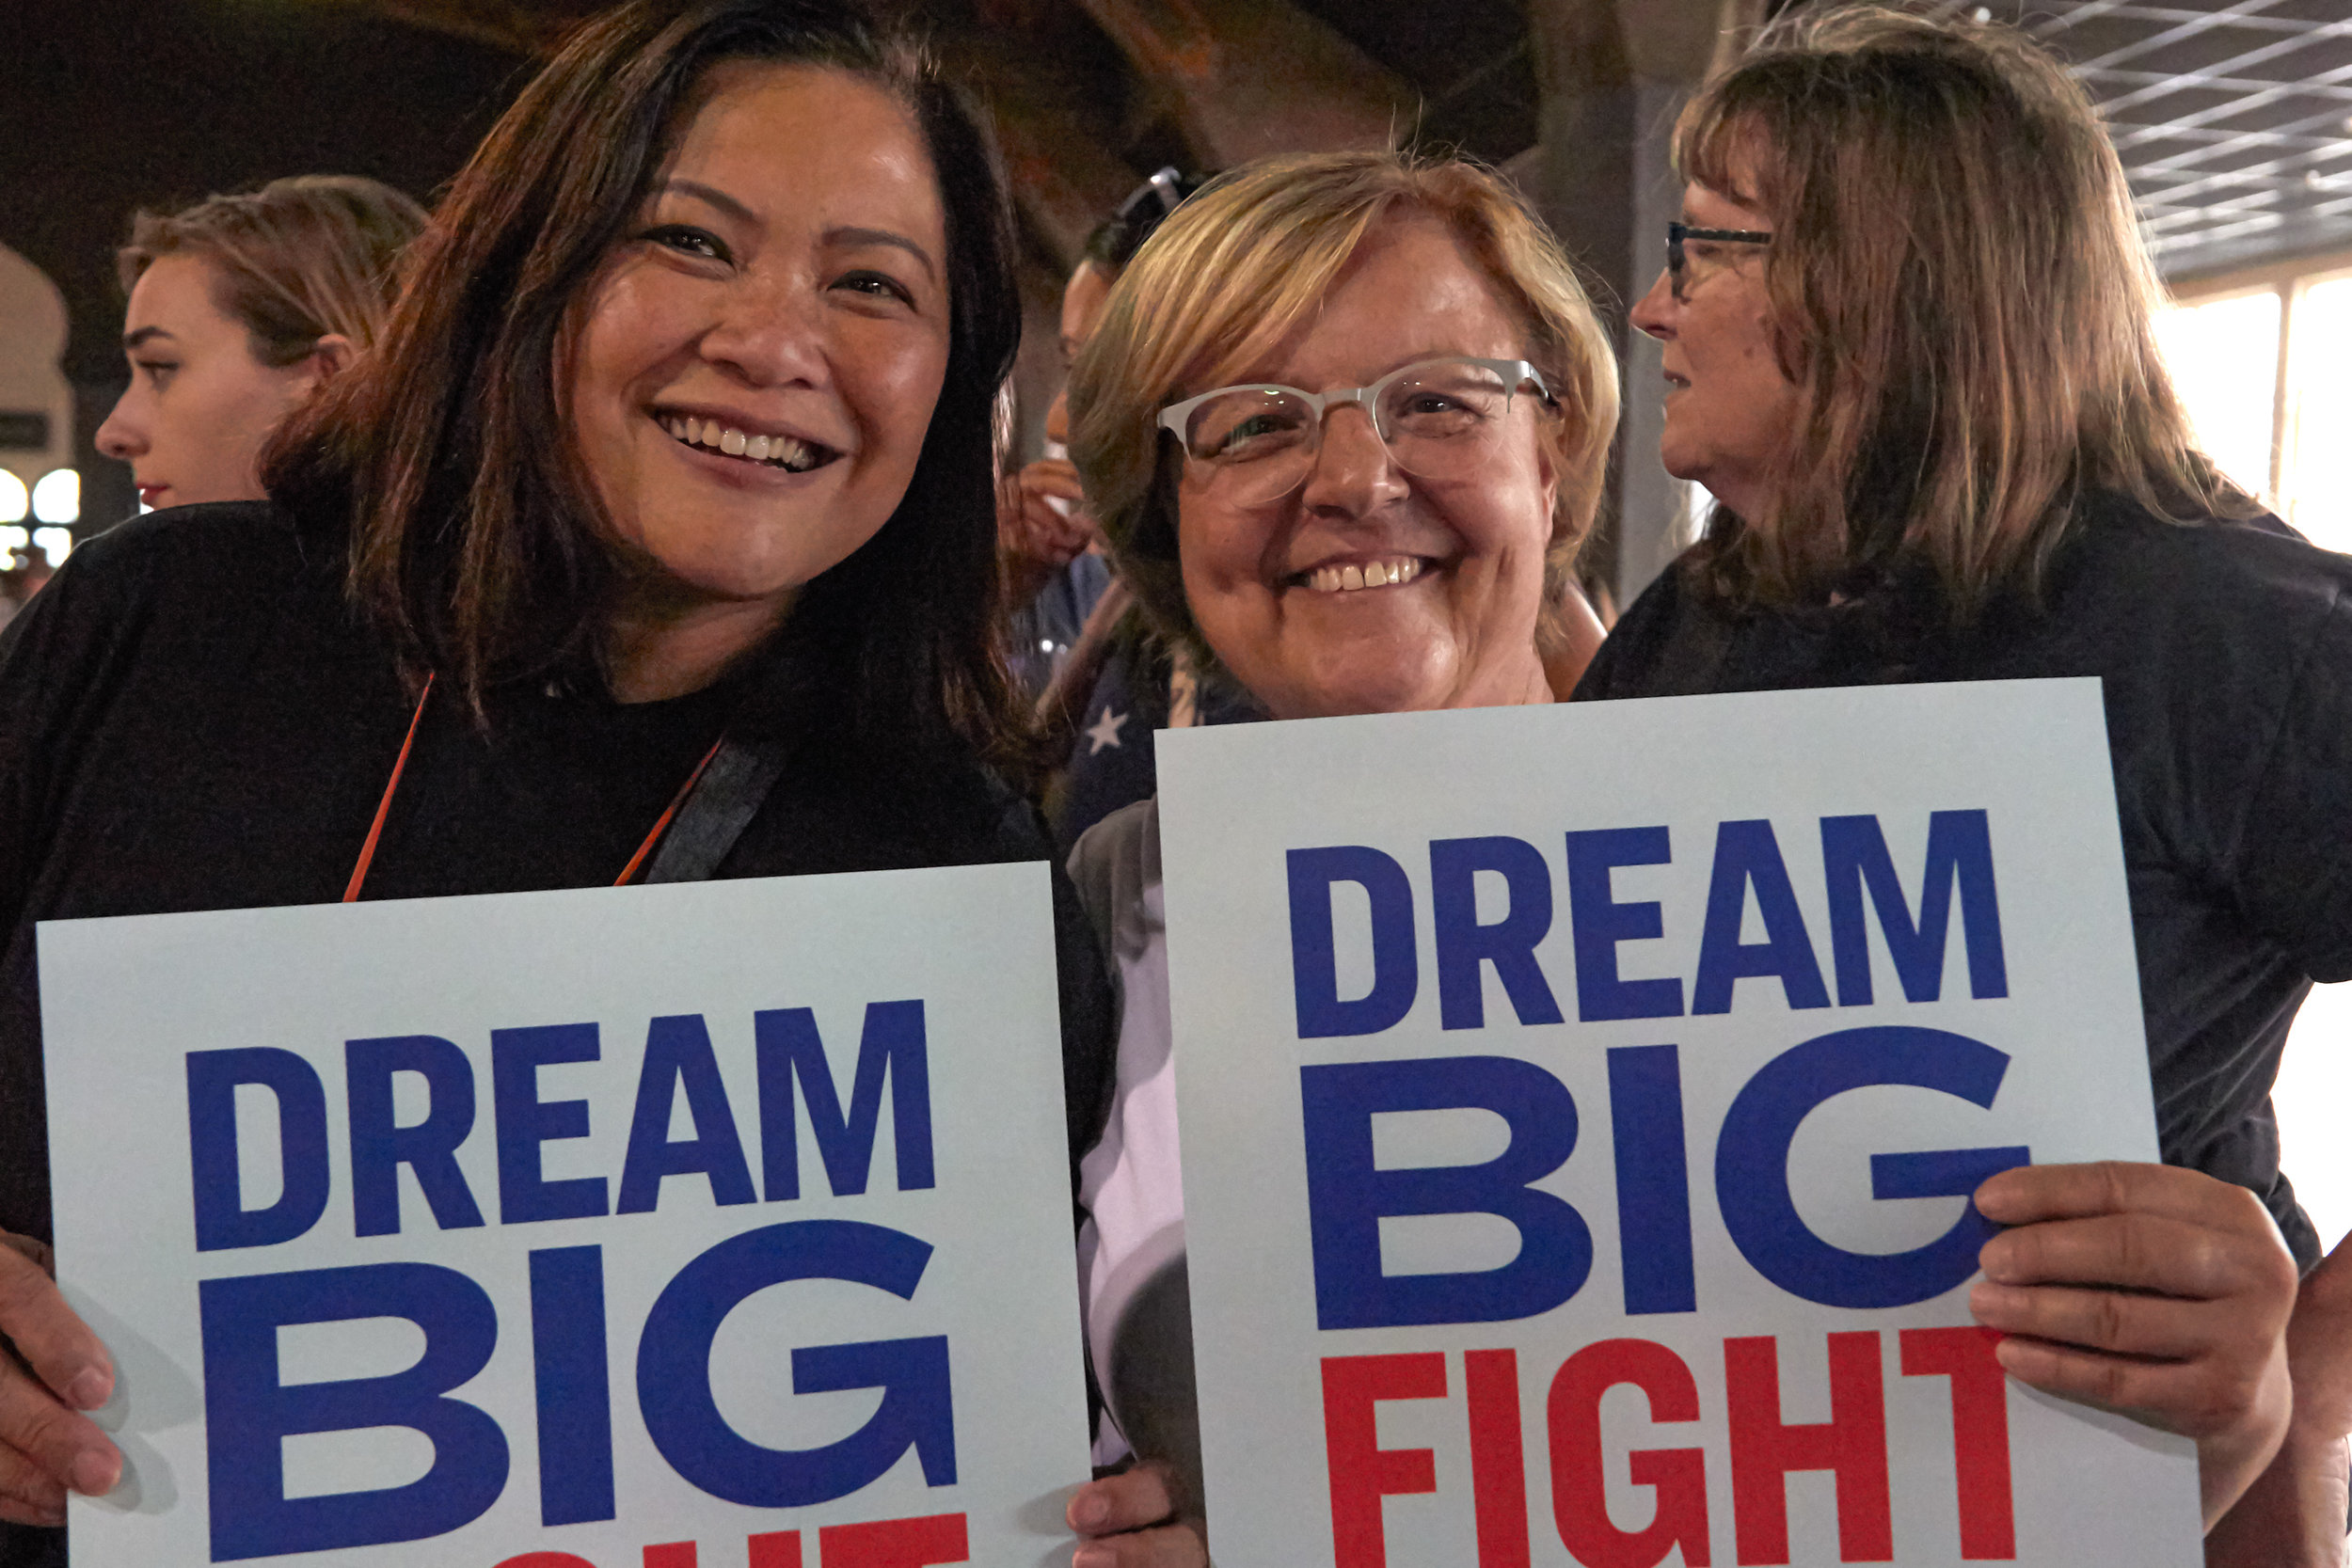  Mimi Roces (left), and Carolyn Casavan, of Long Beach, California, hold signs before a Town Hall event for Elizabeth Warren's presidential campaign, at the Shrine Expo Hall, Los Angeles, California, on August 21st 2019. (Marco Pallotti/The Corsair) 